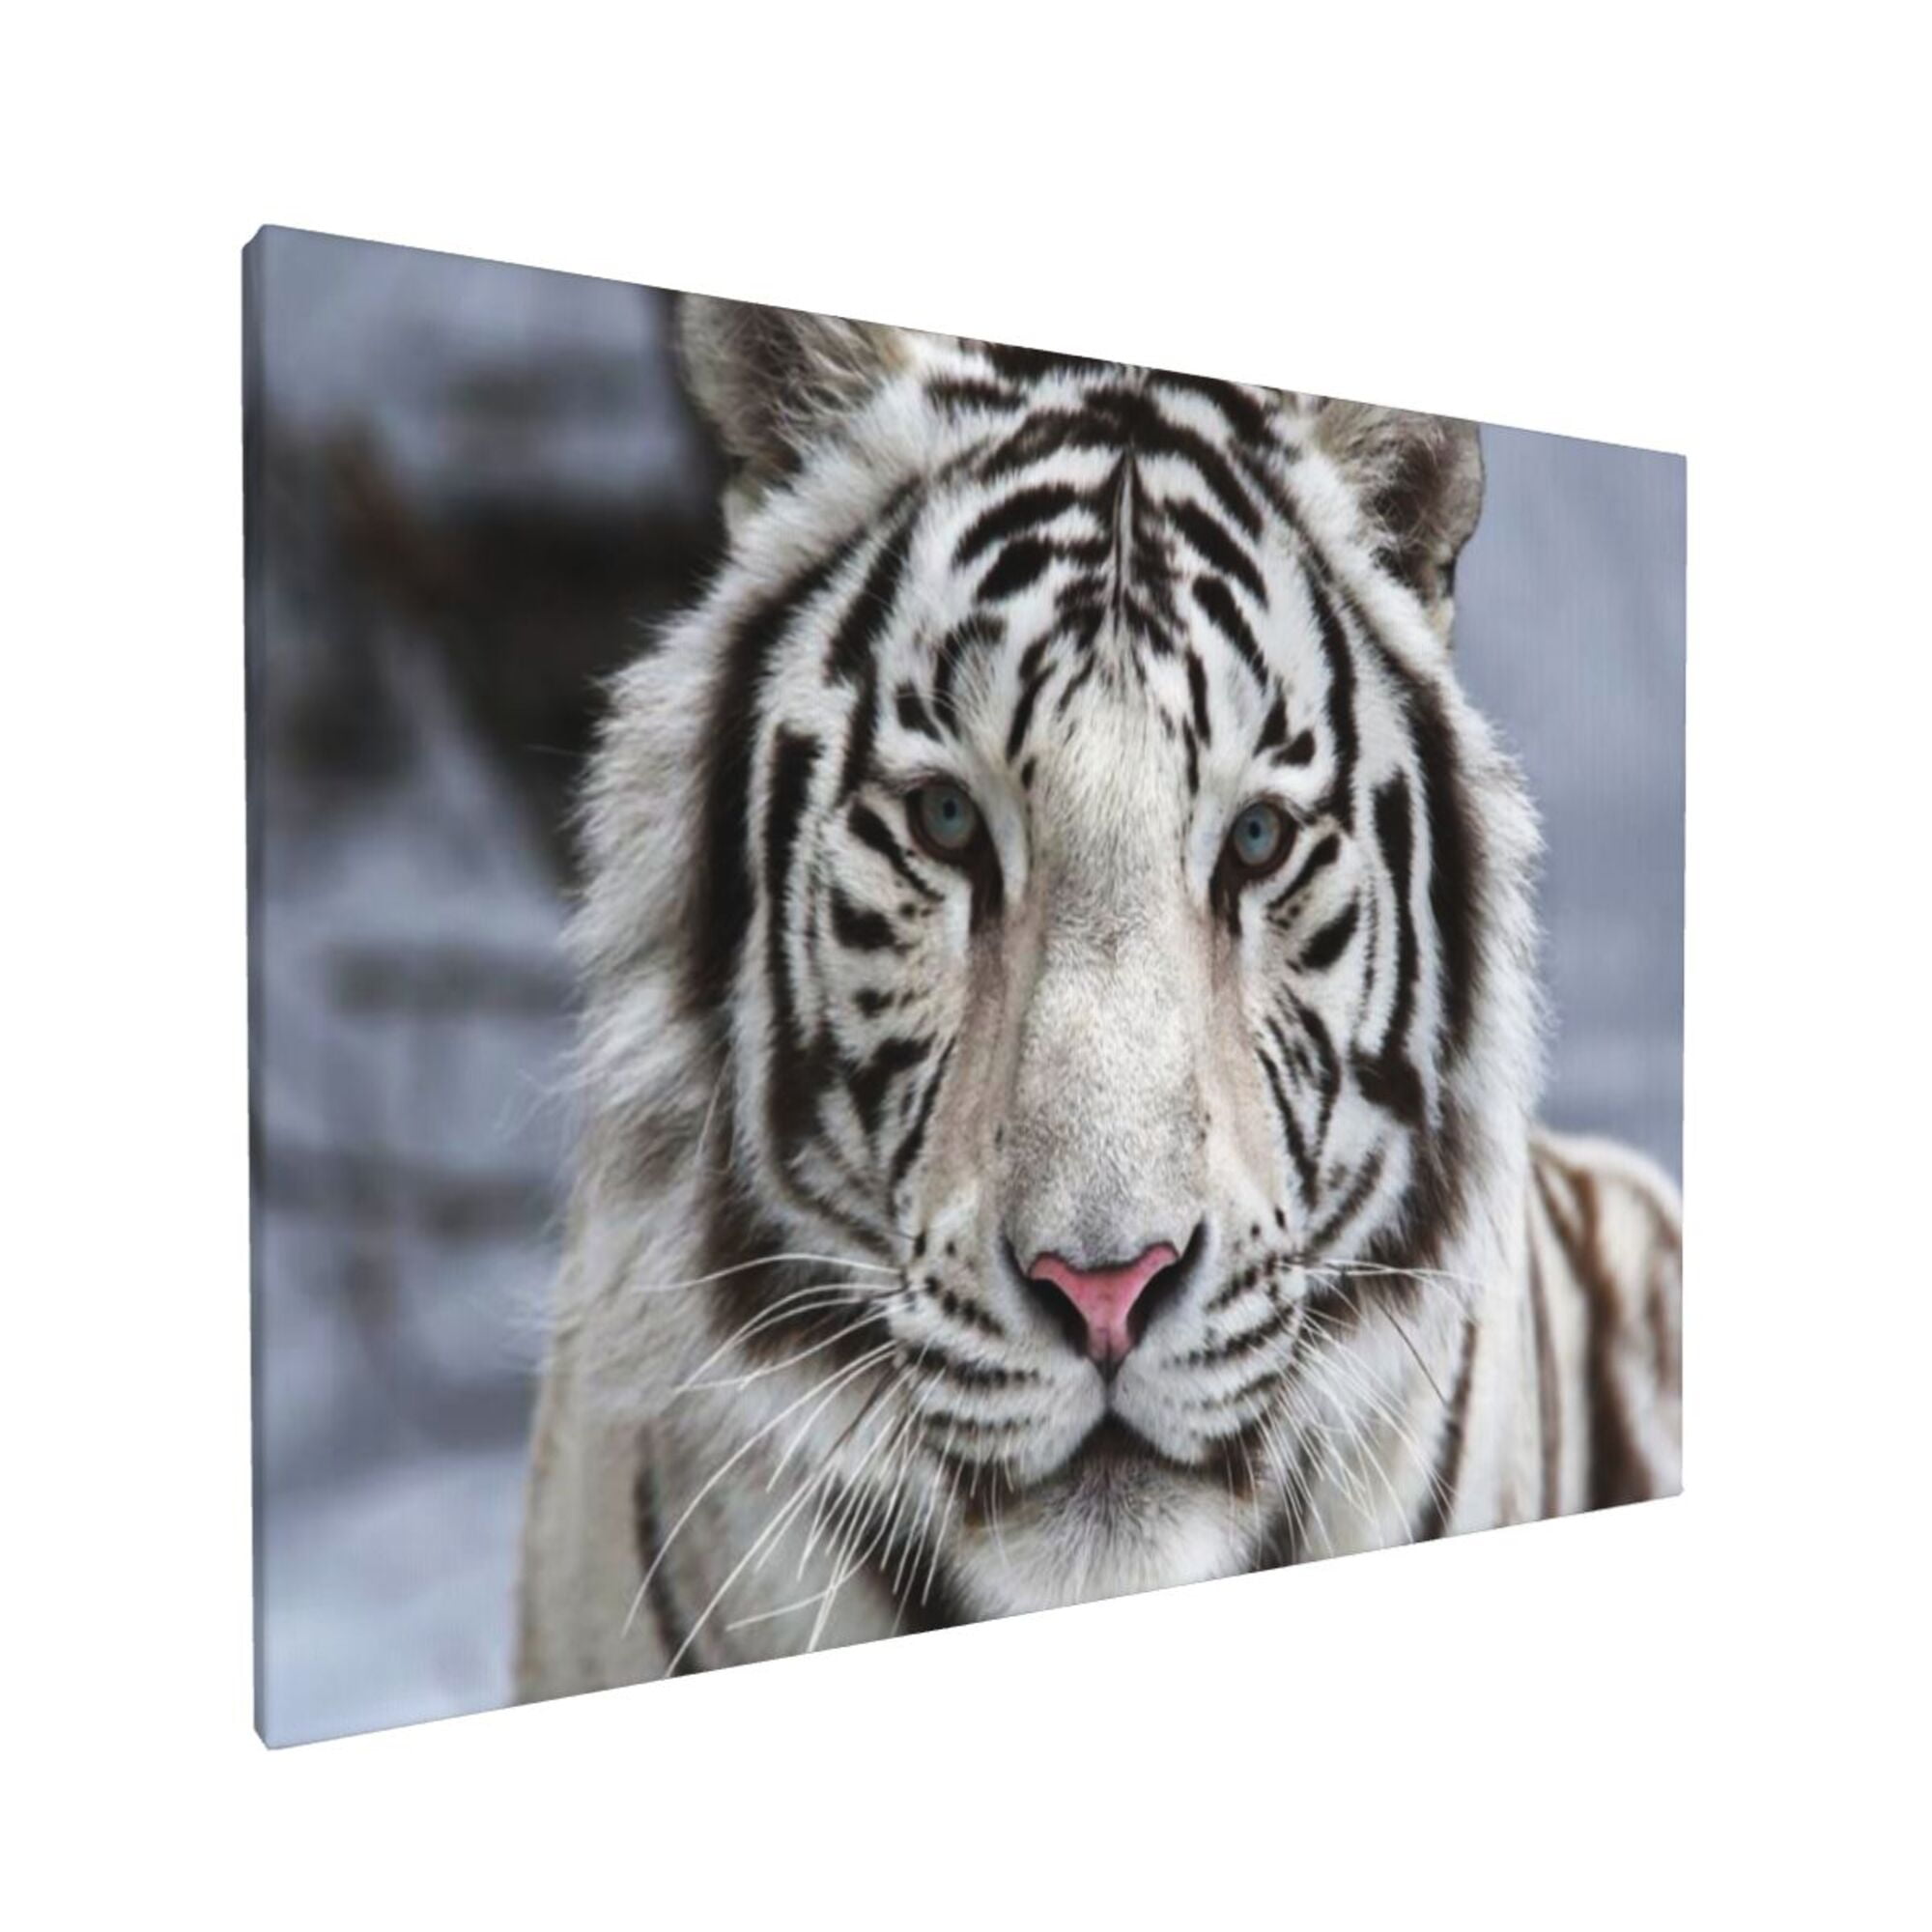 Canvas Modern White Framed For Living Bathroom Decor Bedroom Painting Room Bathroom Wall Decorations Tiger 12x16in Decor Artwork